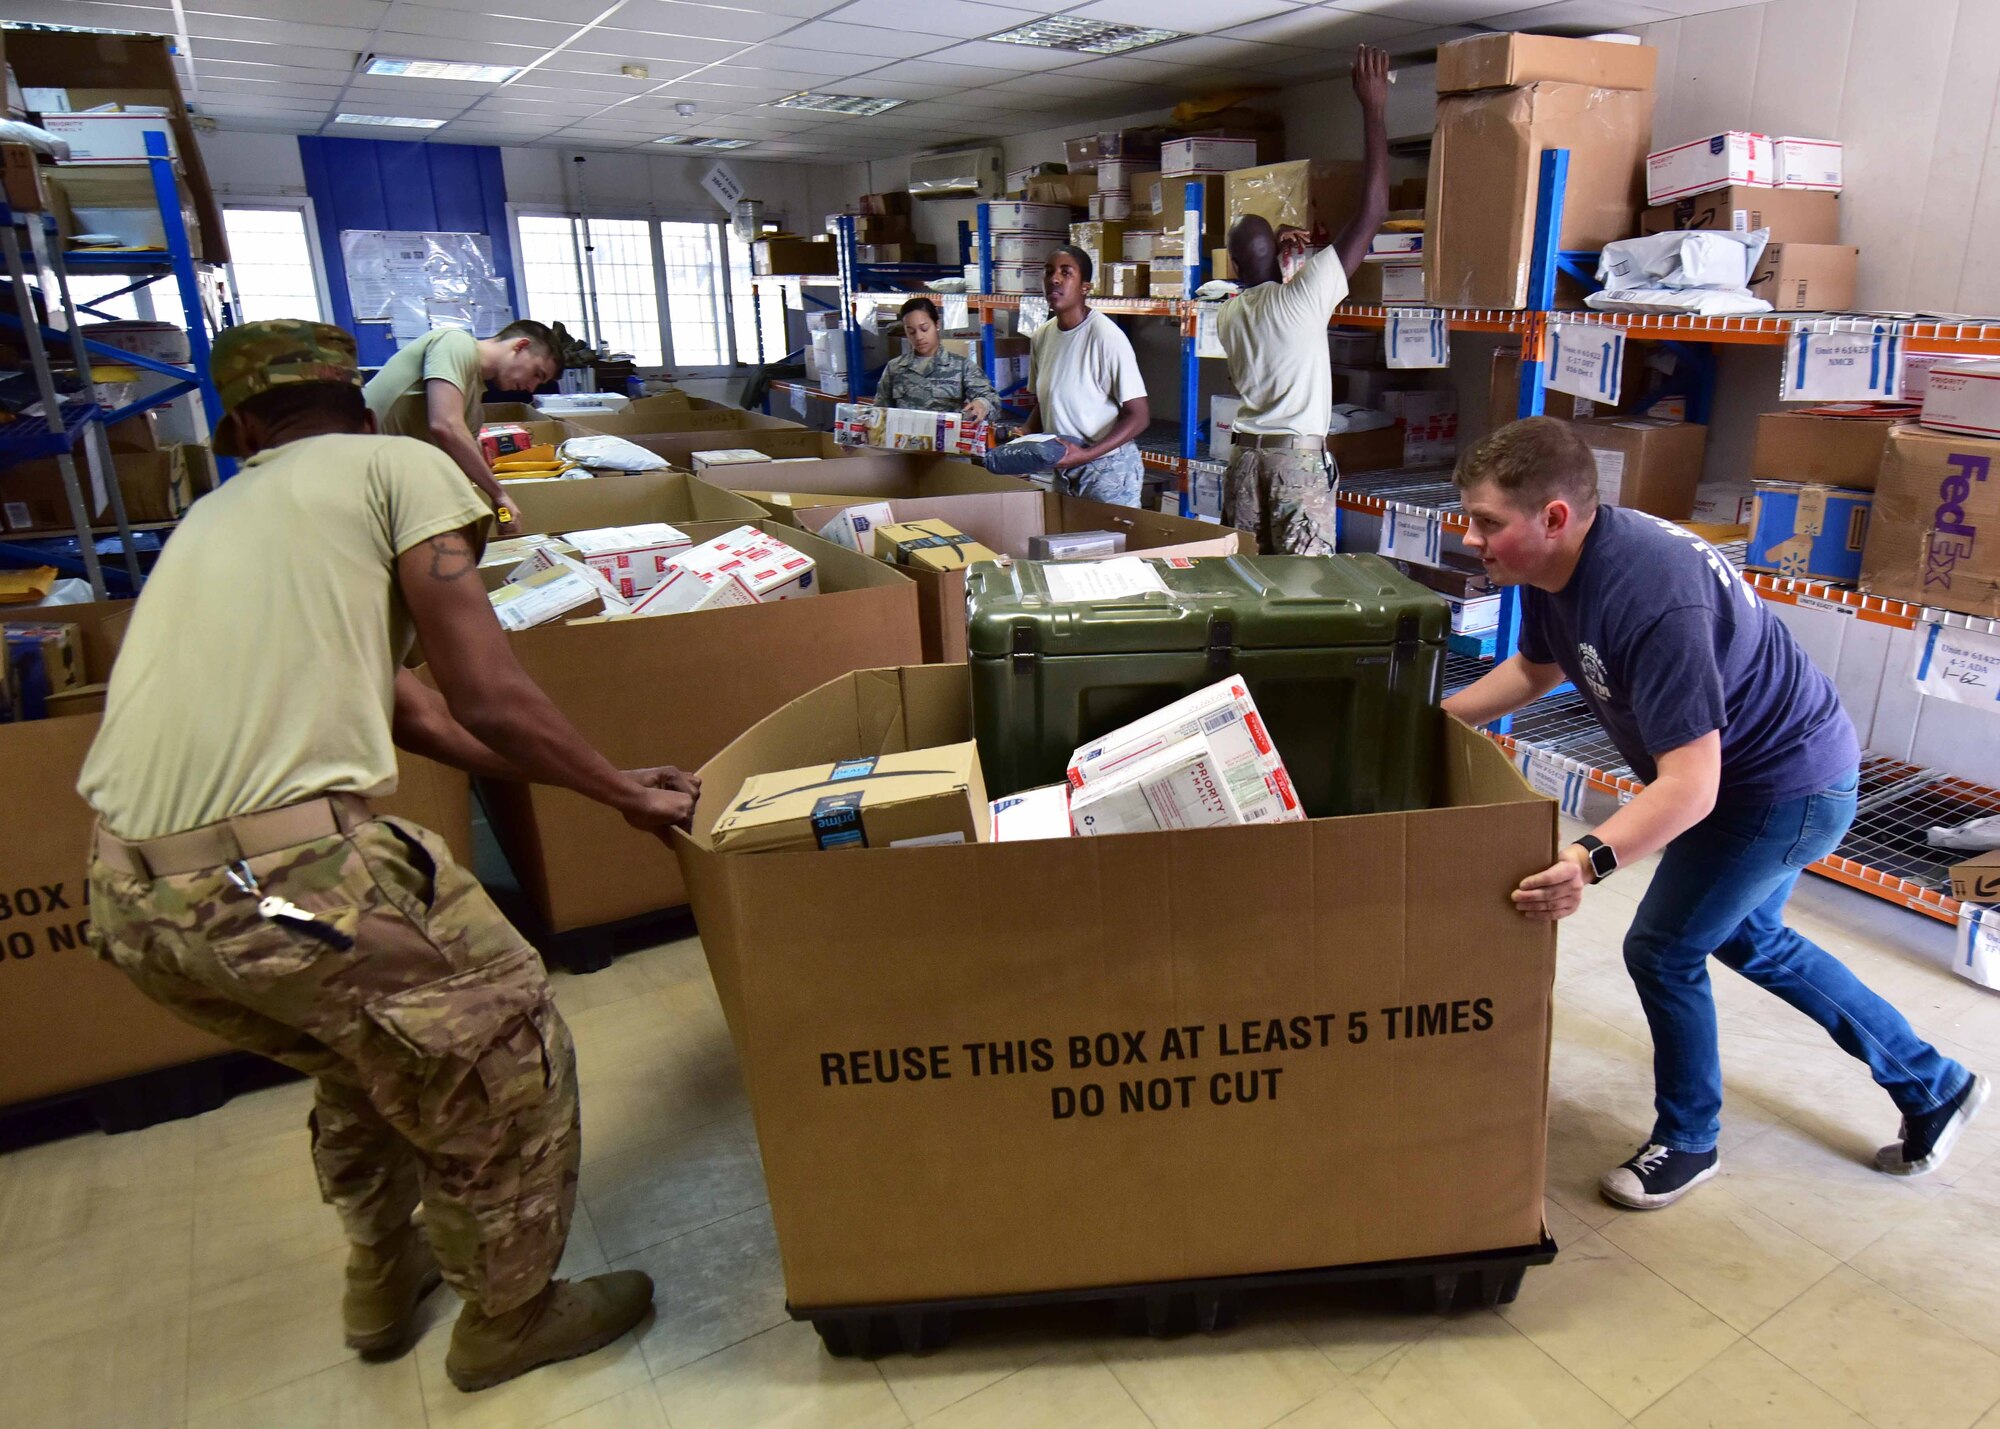 Approximately 30 Airmen from different career fields within the 386th AEW have volunteered to support the air base post office during the holiday season while deployed.